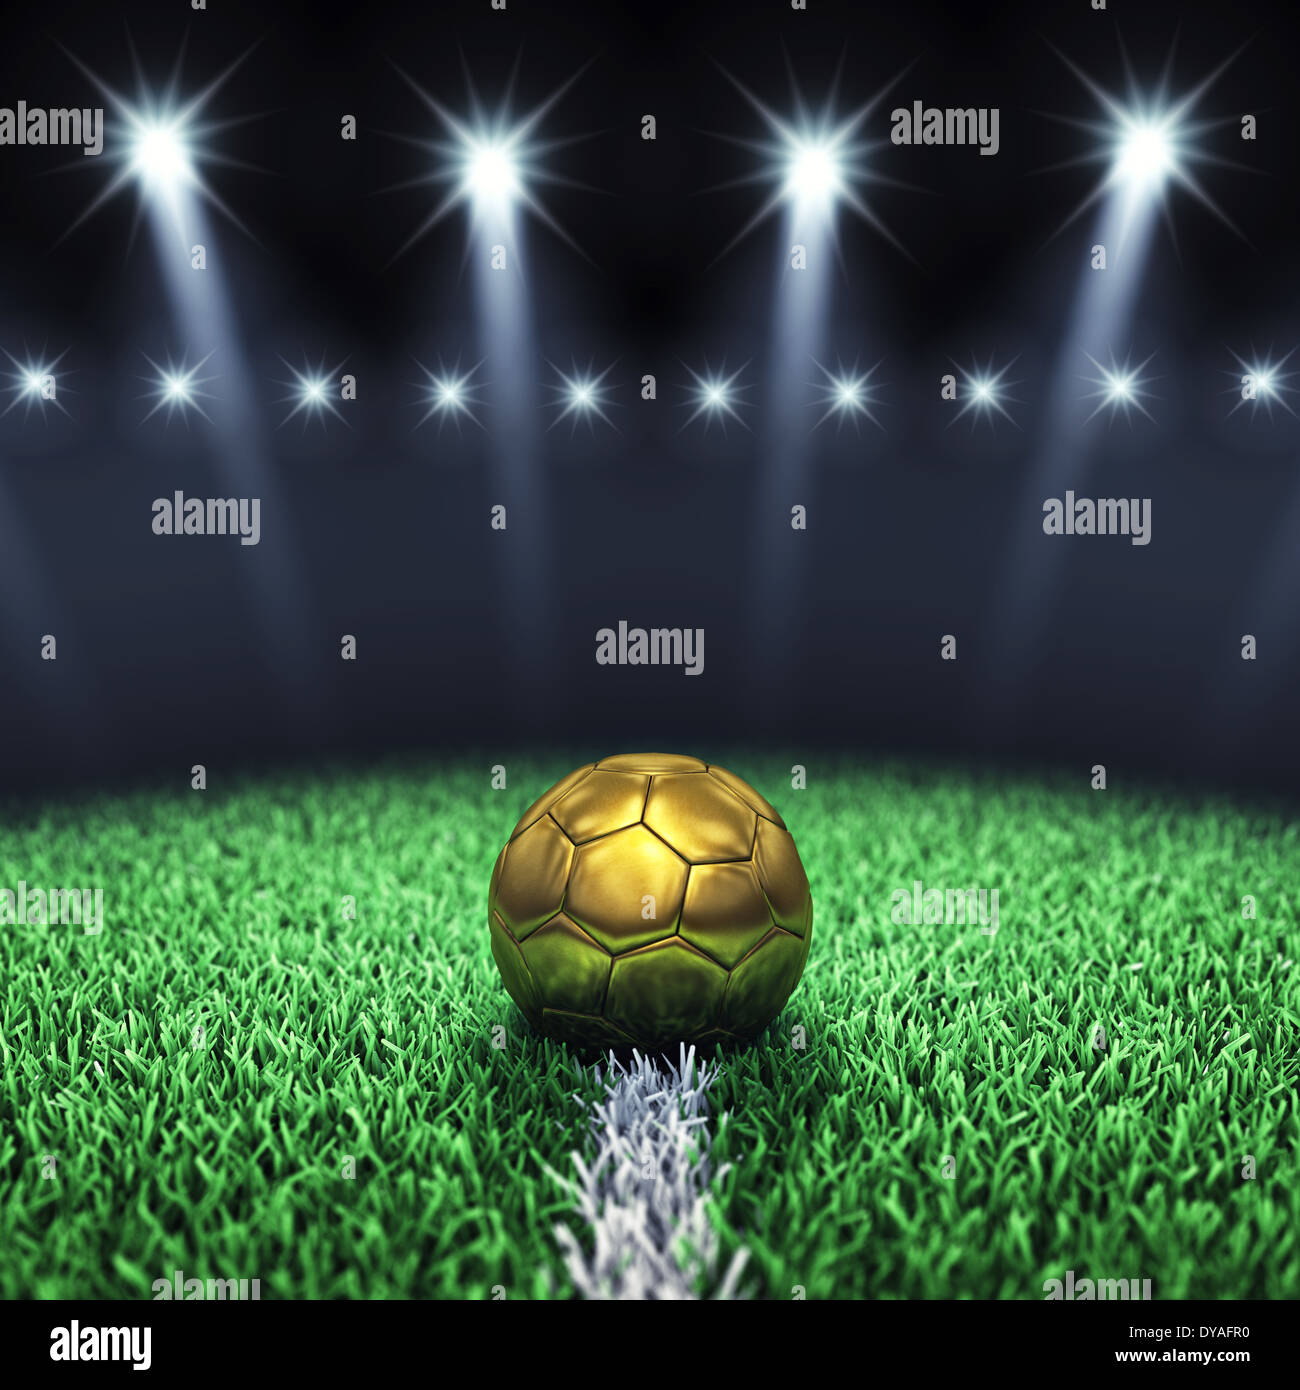 Soccer arena and golden ball with floodlights Stock Photo